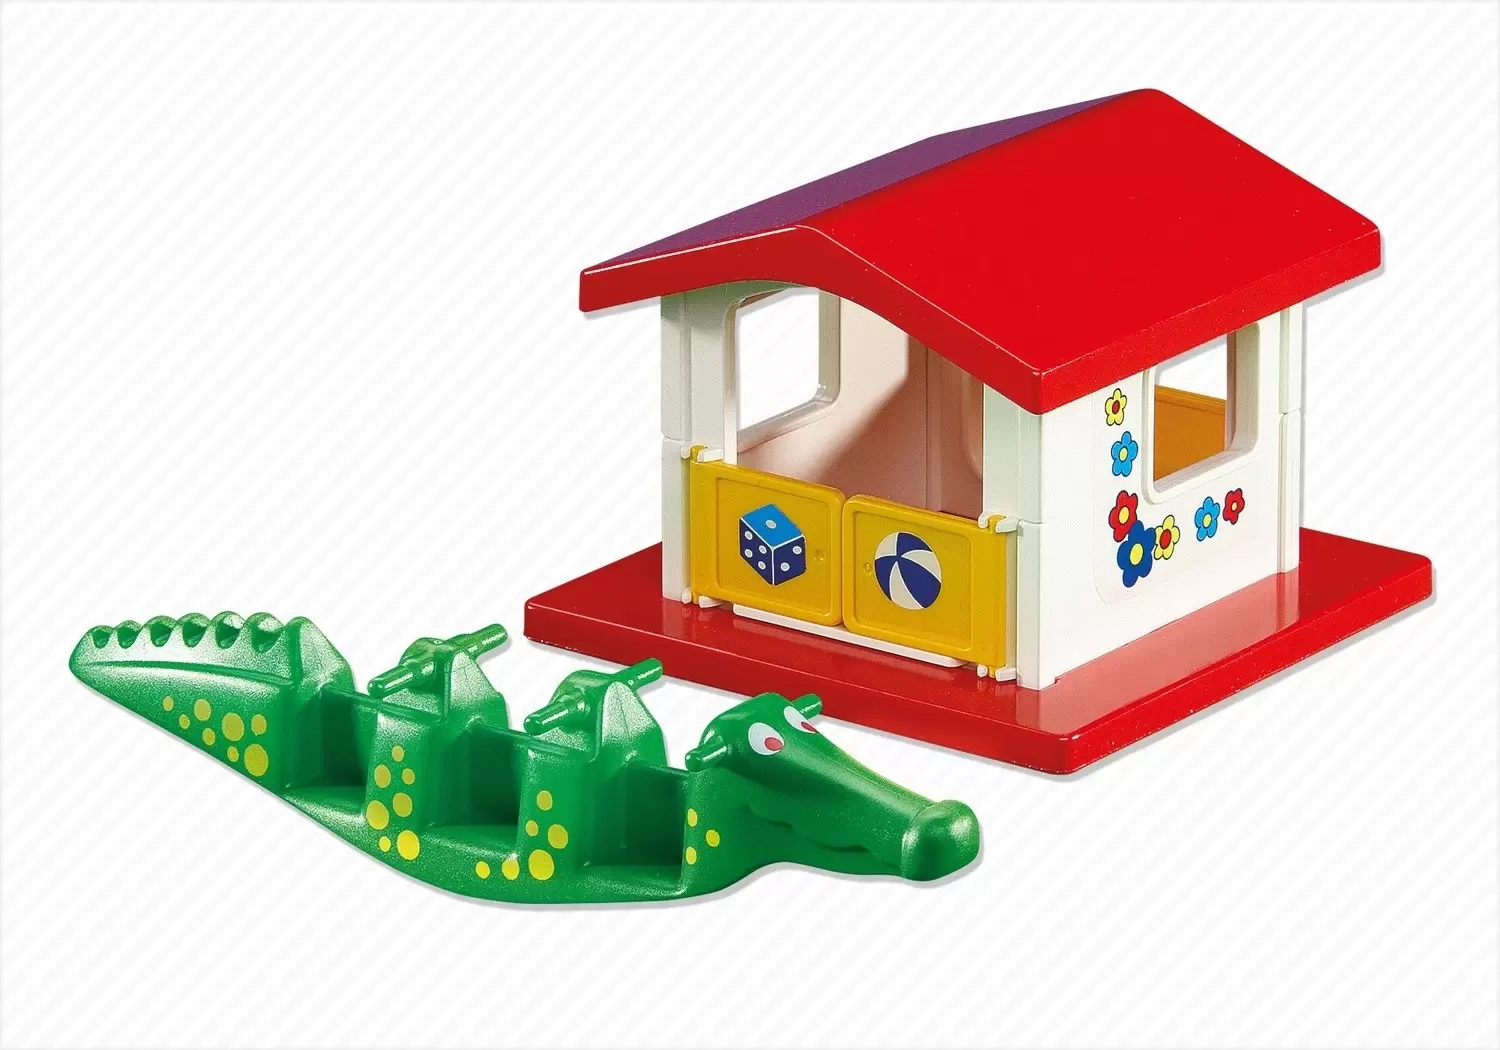 Playmobil Accessories & decorations - Play House and Crocodile Seesaw